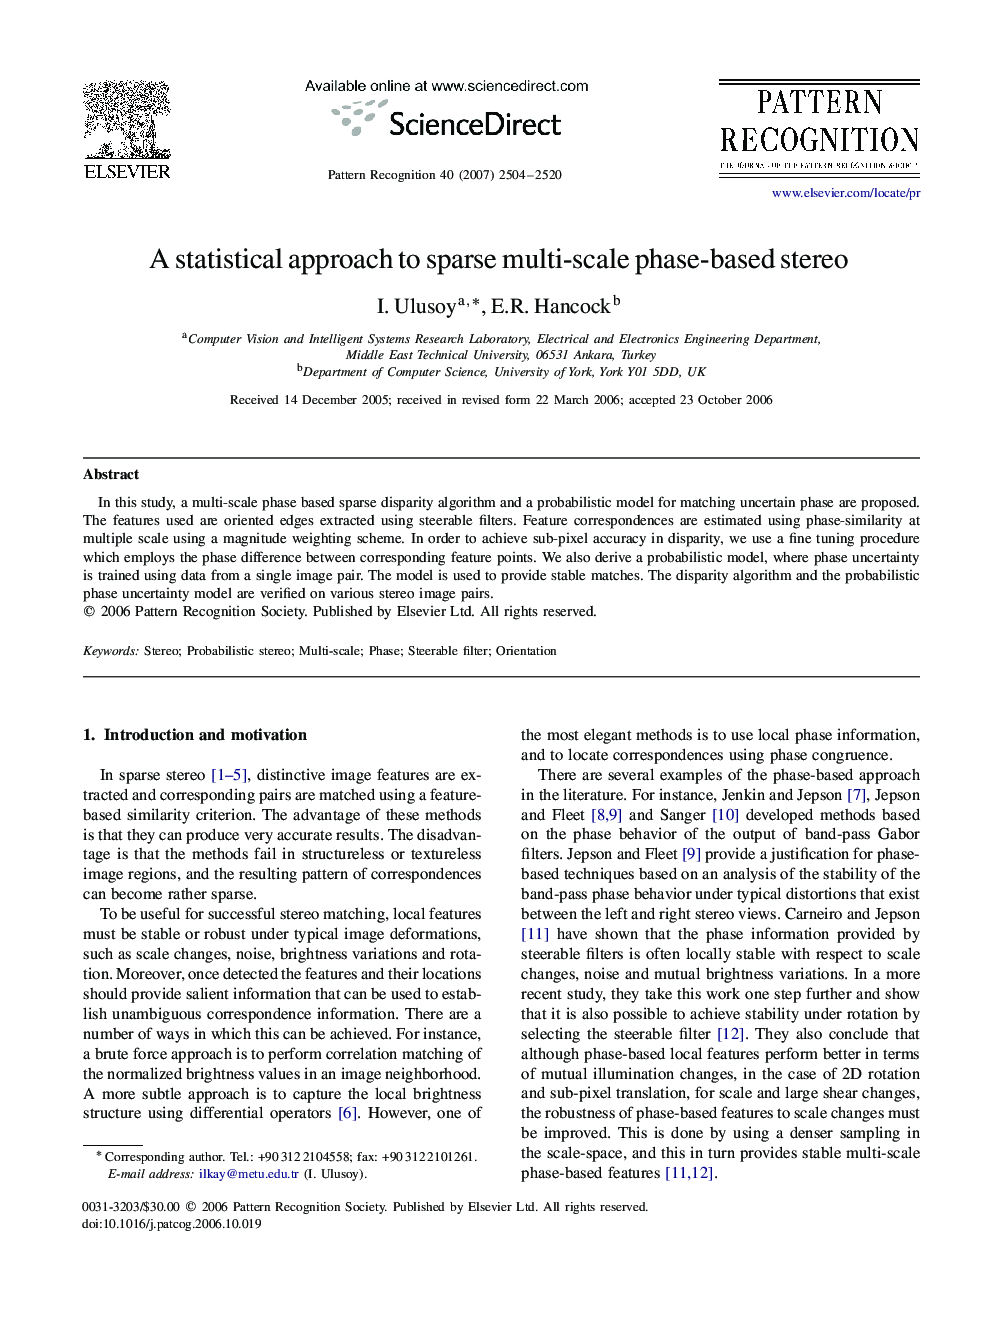 A statistical approach to sparse multi-scale phase-based stereo